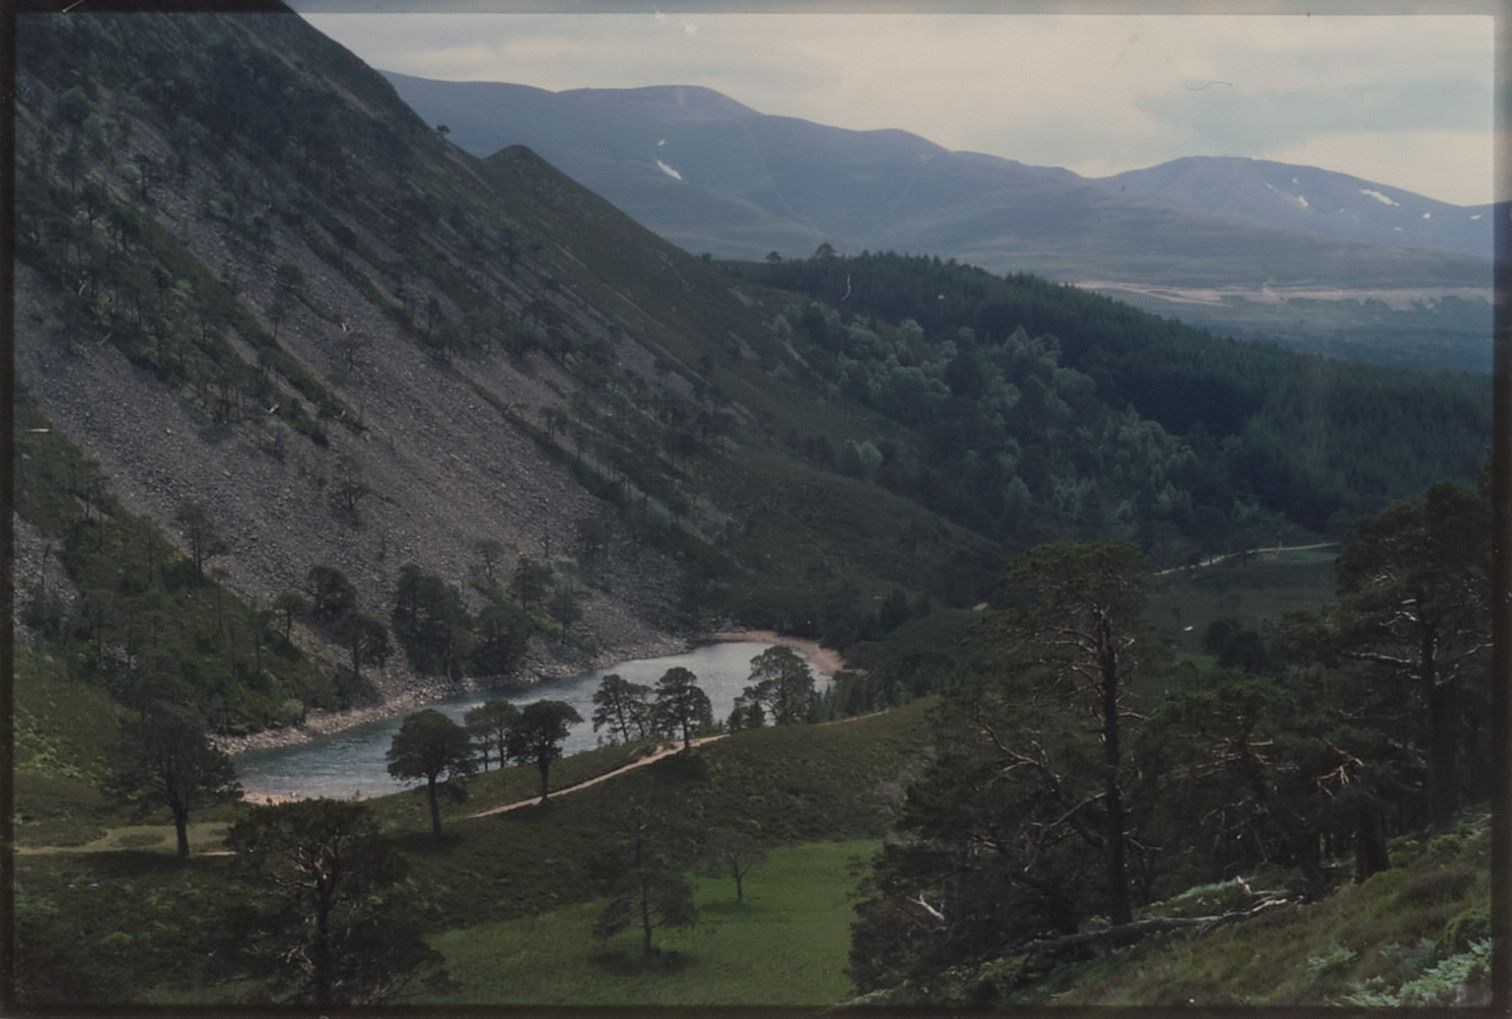 'Lovely high view of the Green Loch at Glenmore Forest' taken in 1984. Photo: George Dey